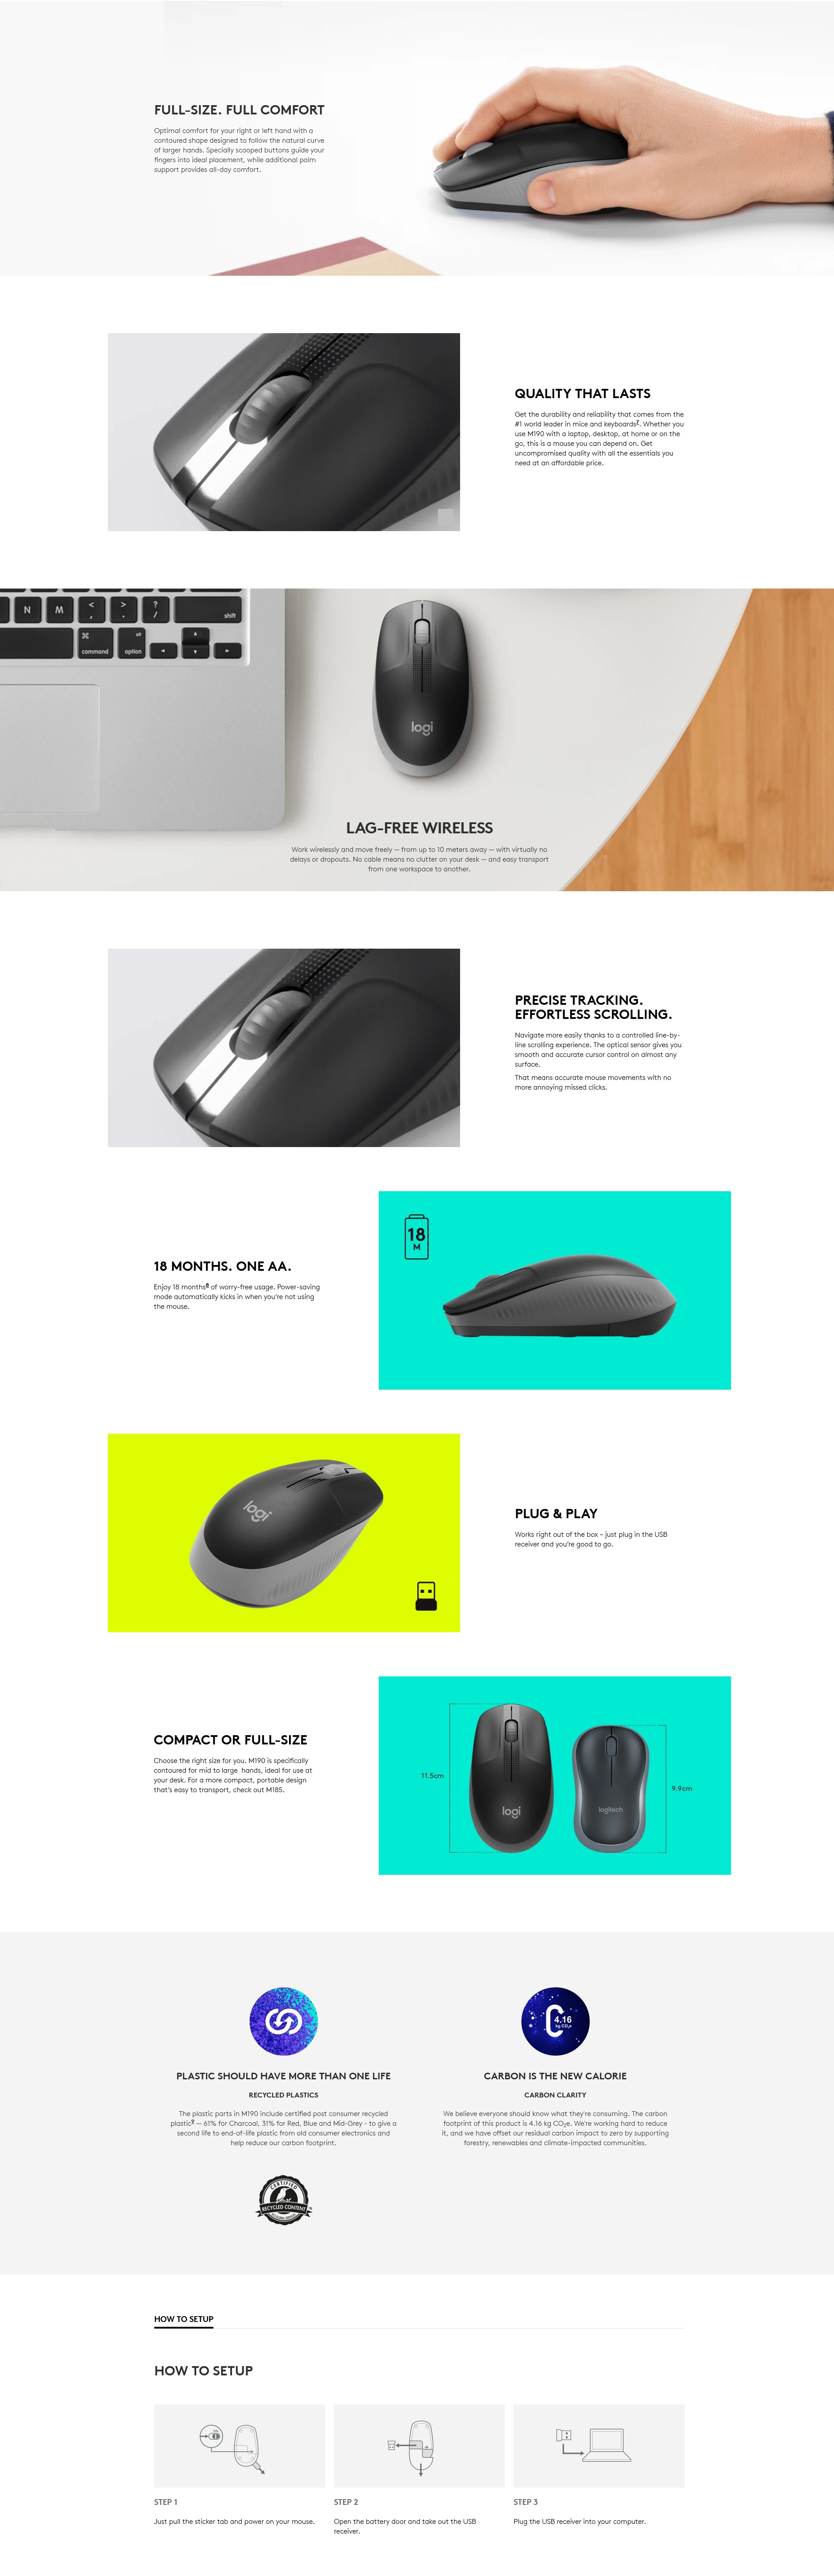 A large marketing image providing additional information about the product Logitech M190 Wireless Mouse - Blue - Additional alt info not provided